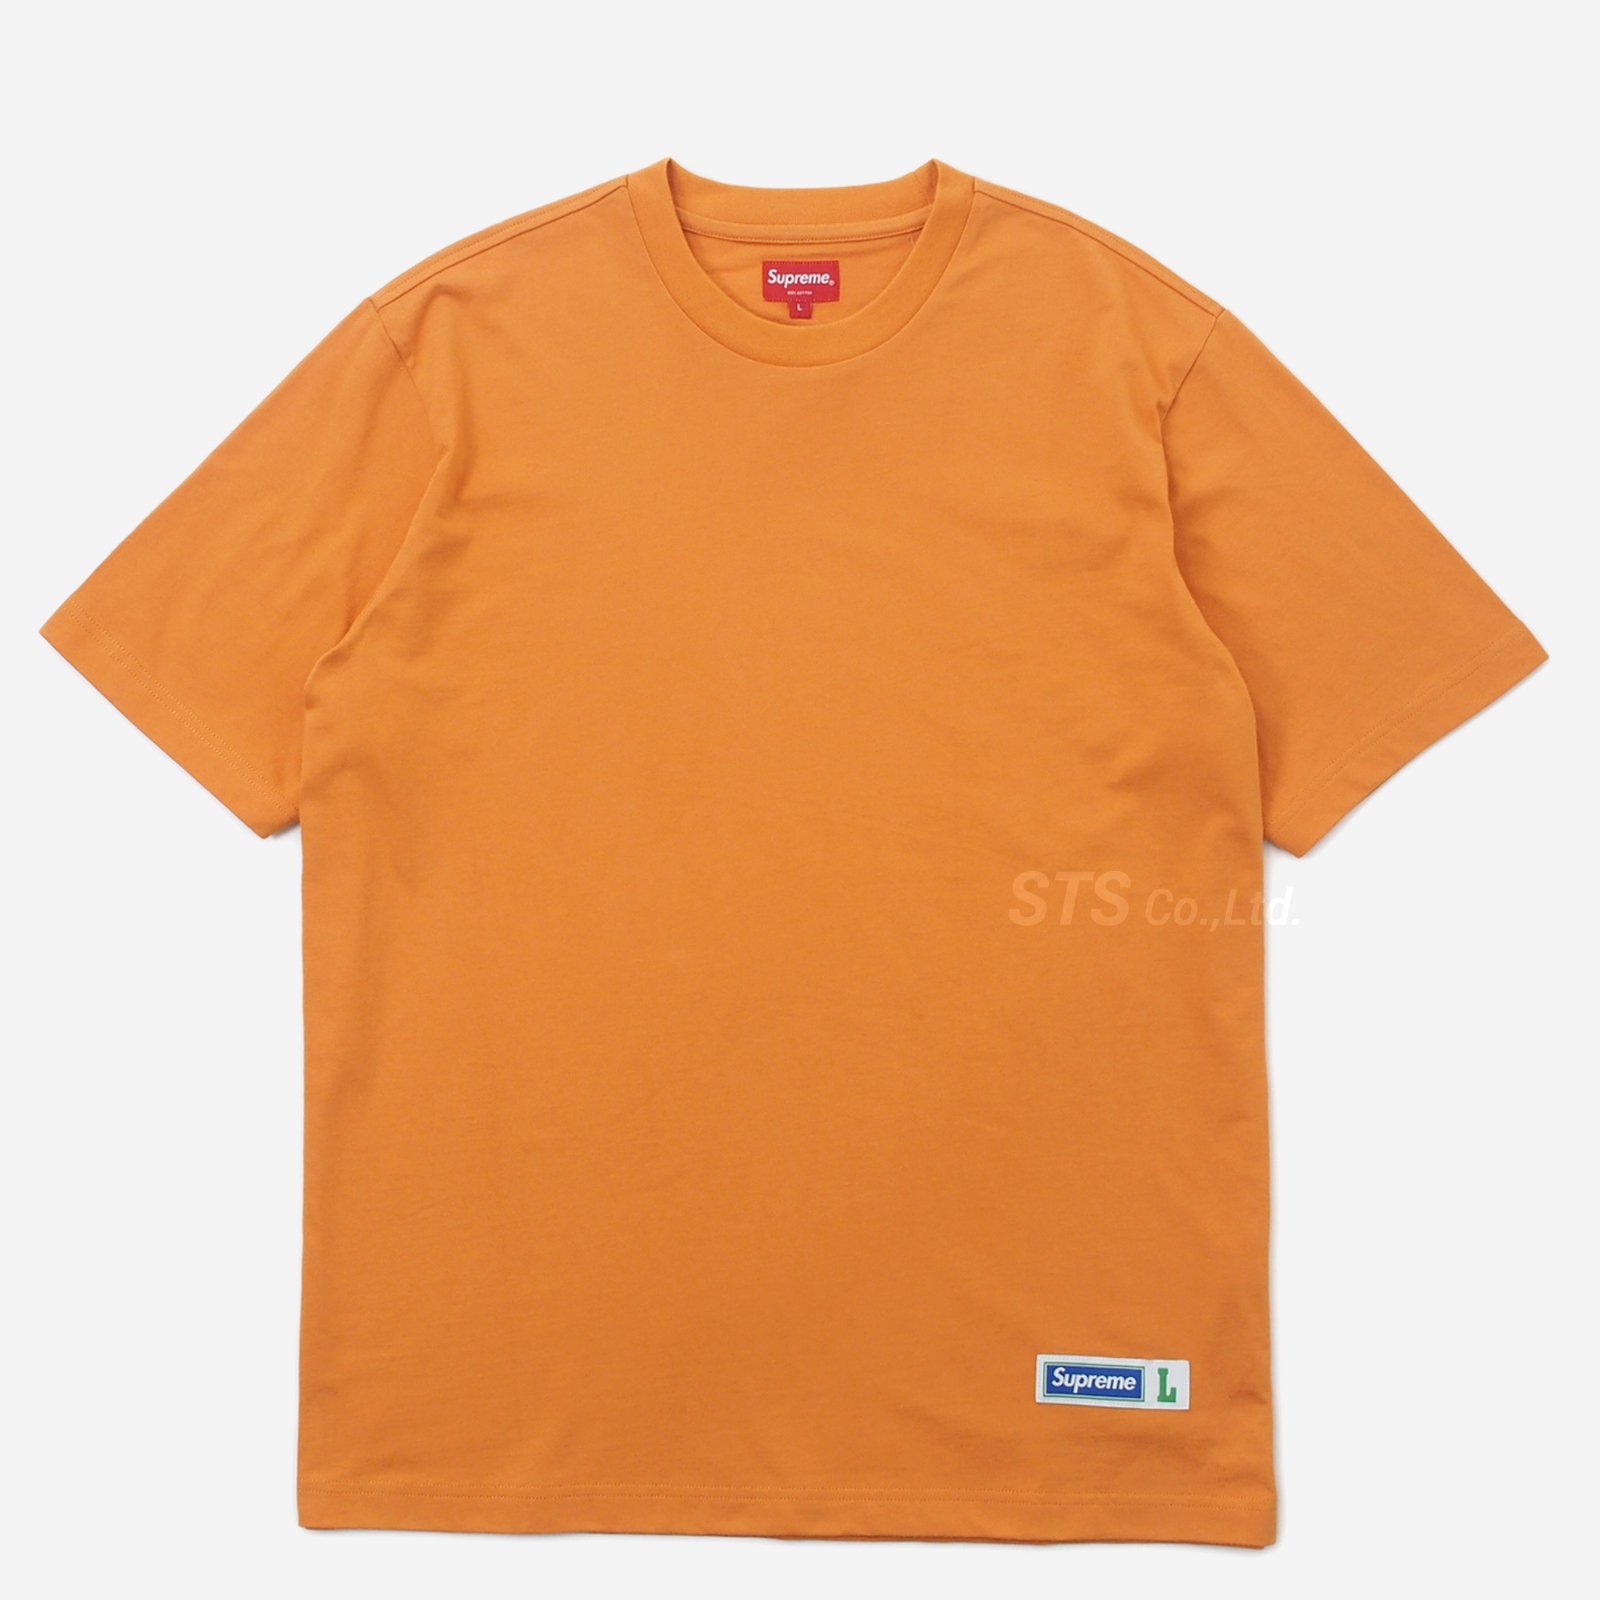 Supreme Athletic Label S/S Top カモ Ｍ www.krzysztofbialy.com